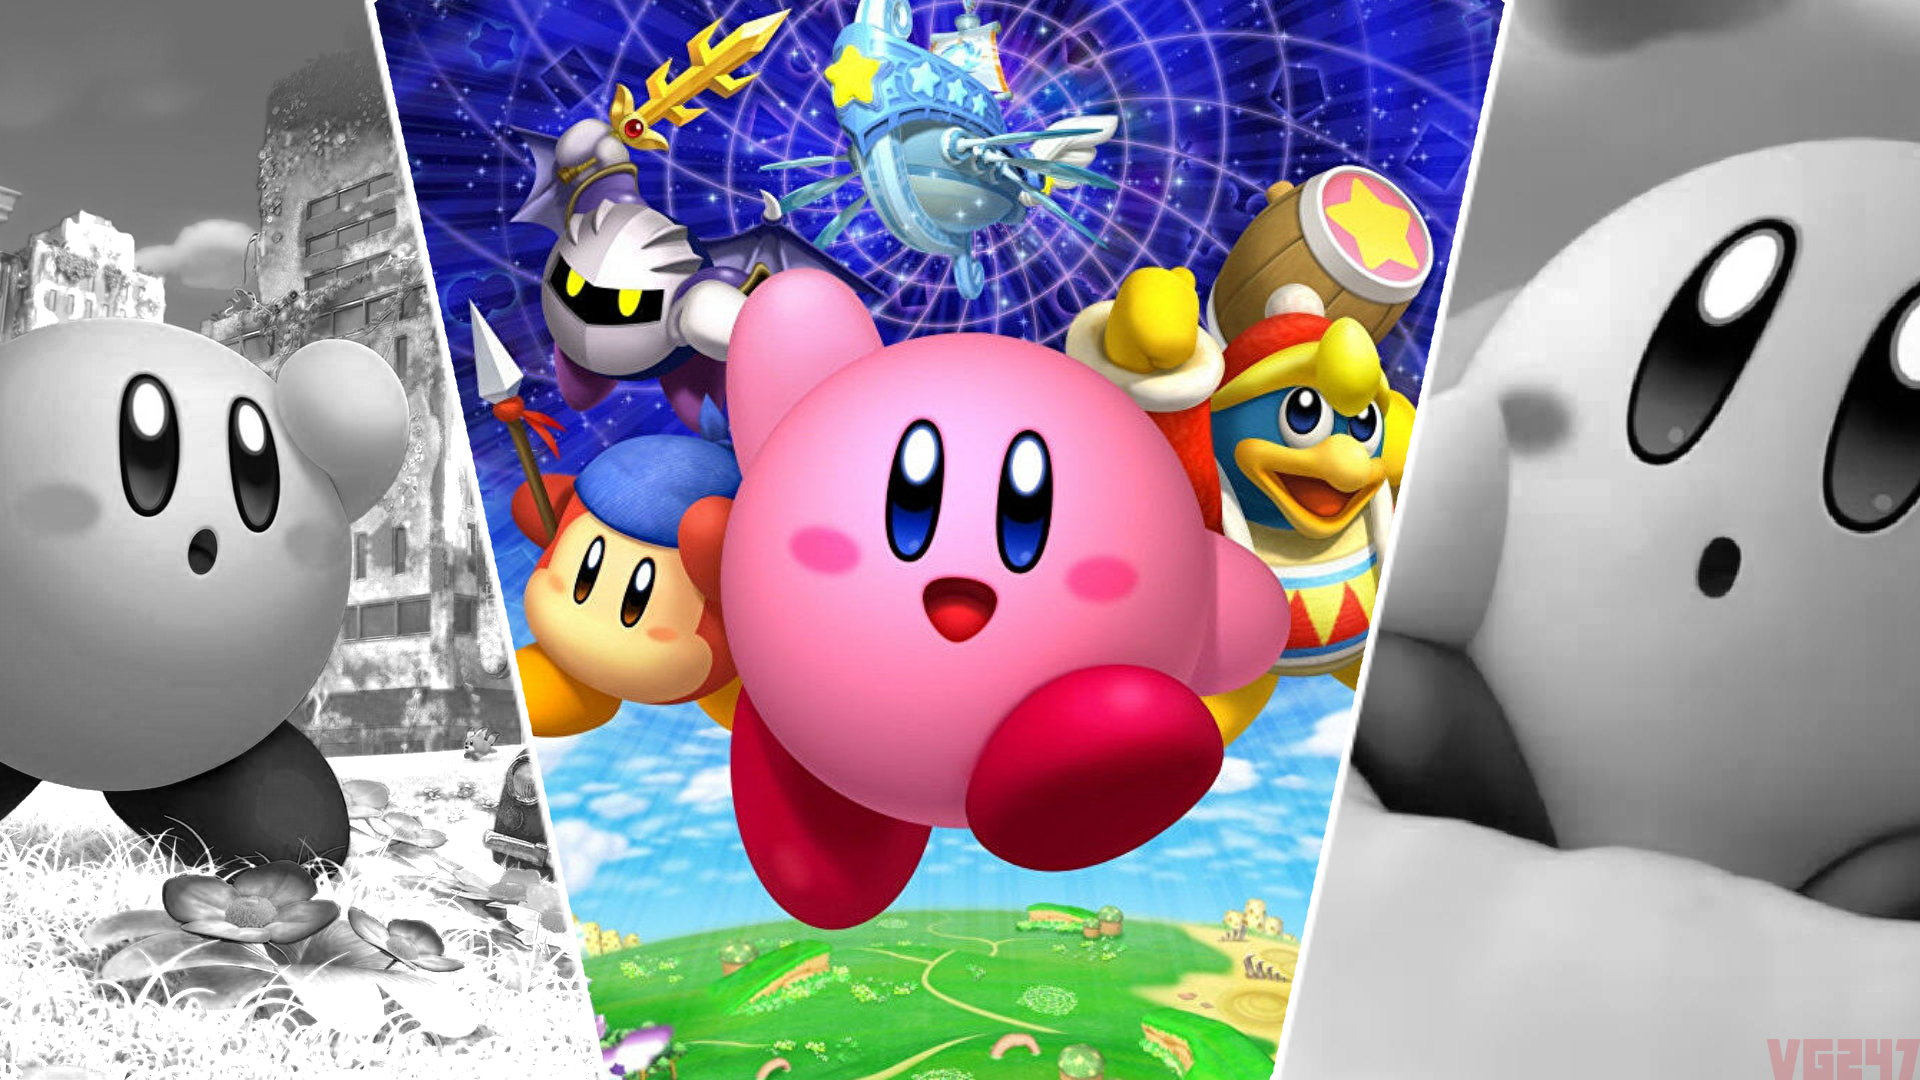 kirby return to dream land deluxe switch 2019